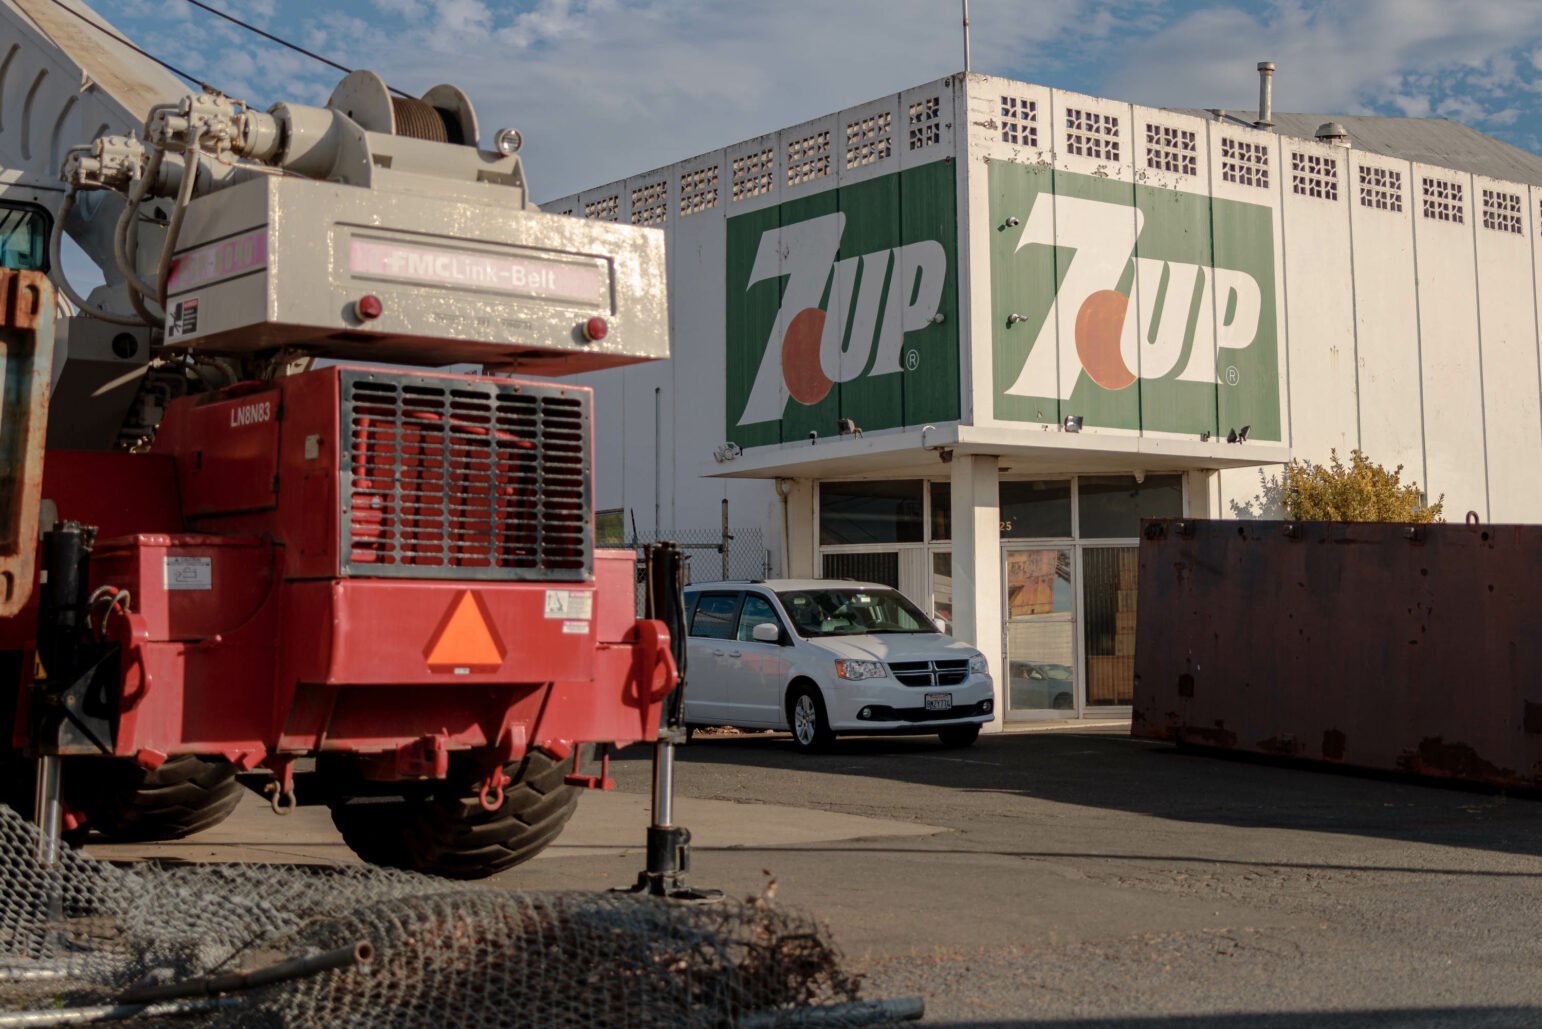 A former 7Up factory building with a large logo on the side, viewed from the parking lot. A white van is parked in front, and an industrial crane is partially visible on the left. The scene is lit by the late afternoon sun.